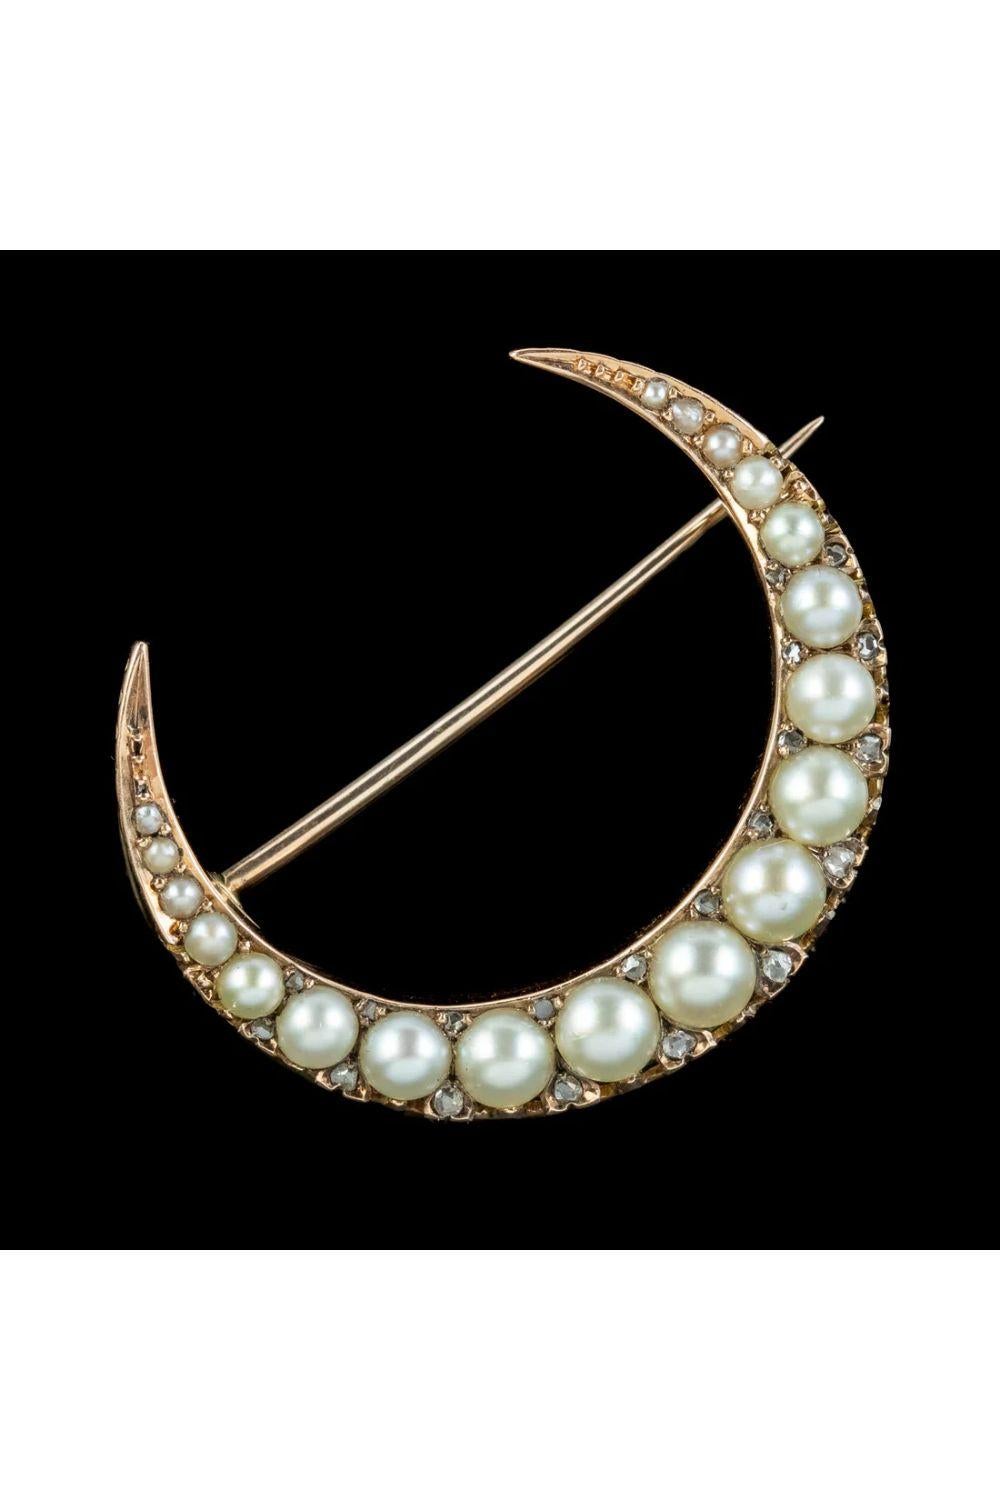 A beautiful antique late Victorian crescent moon brooch (Circa 1900) modelled in 18ct gold and lined with lustrous pearls and twinkling diamonds that graduate in size from each tip.   

Moon images became popular jewellery motifs during the late